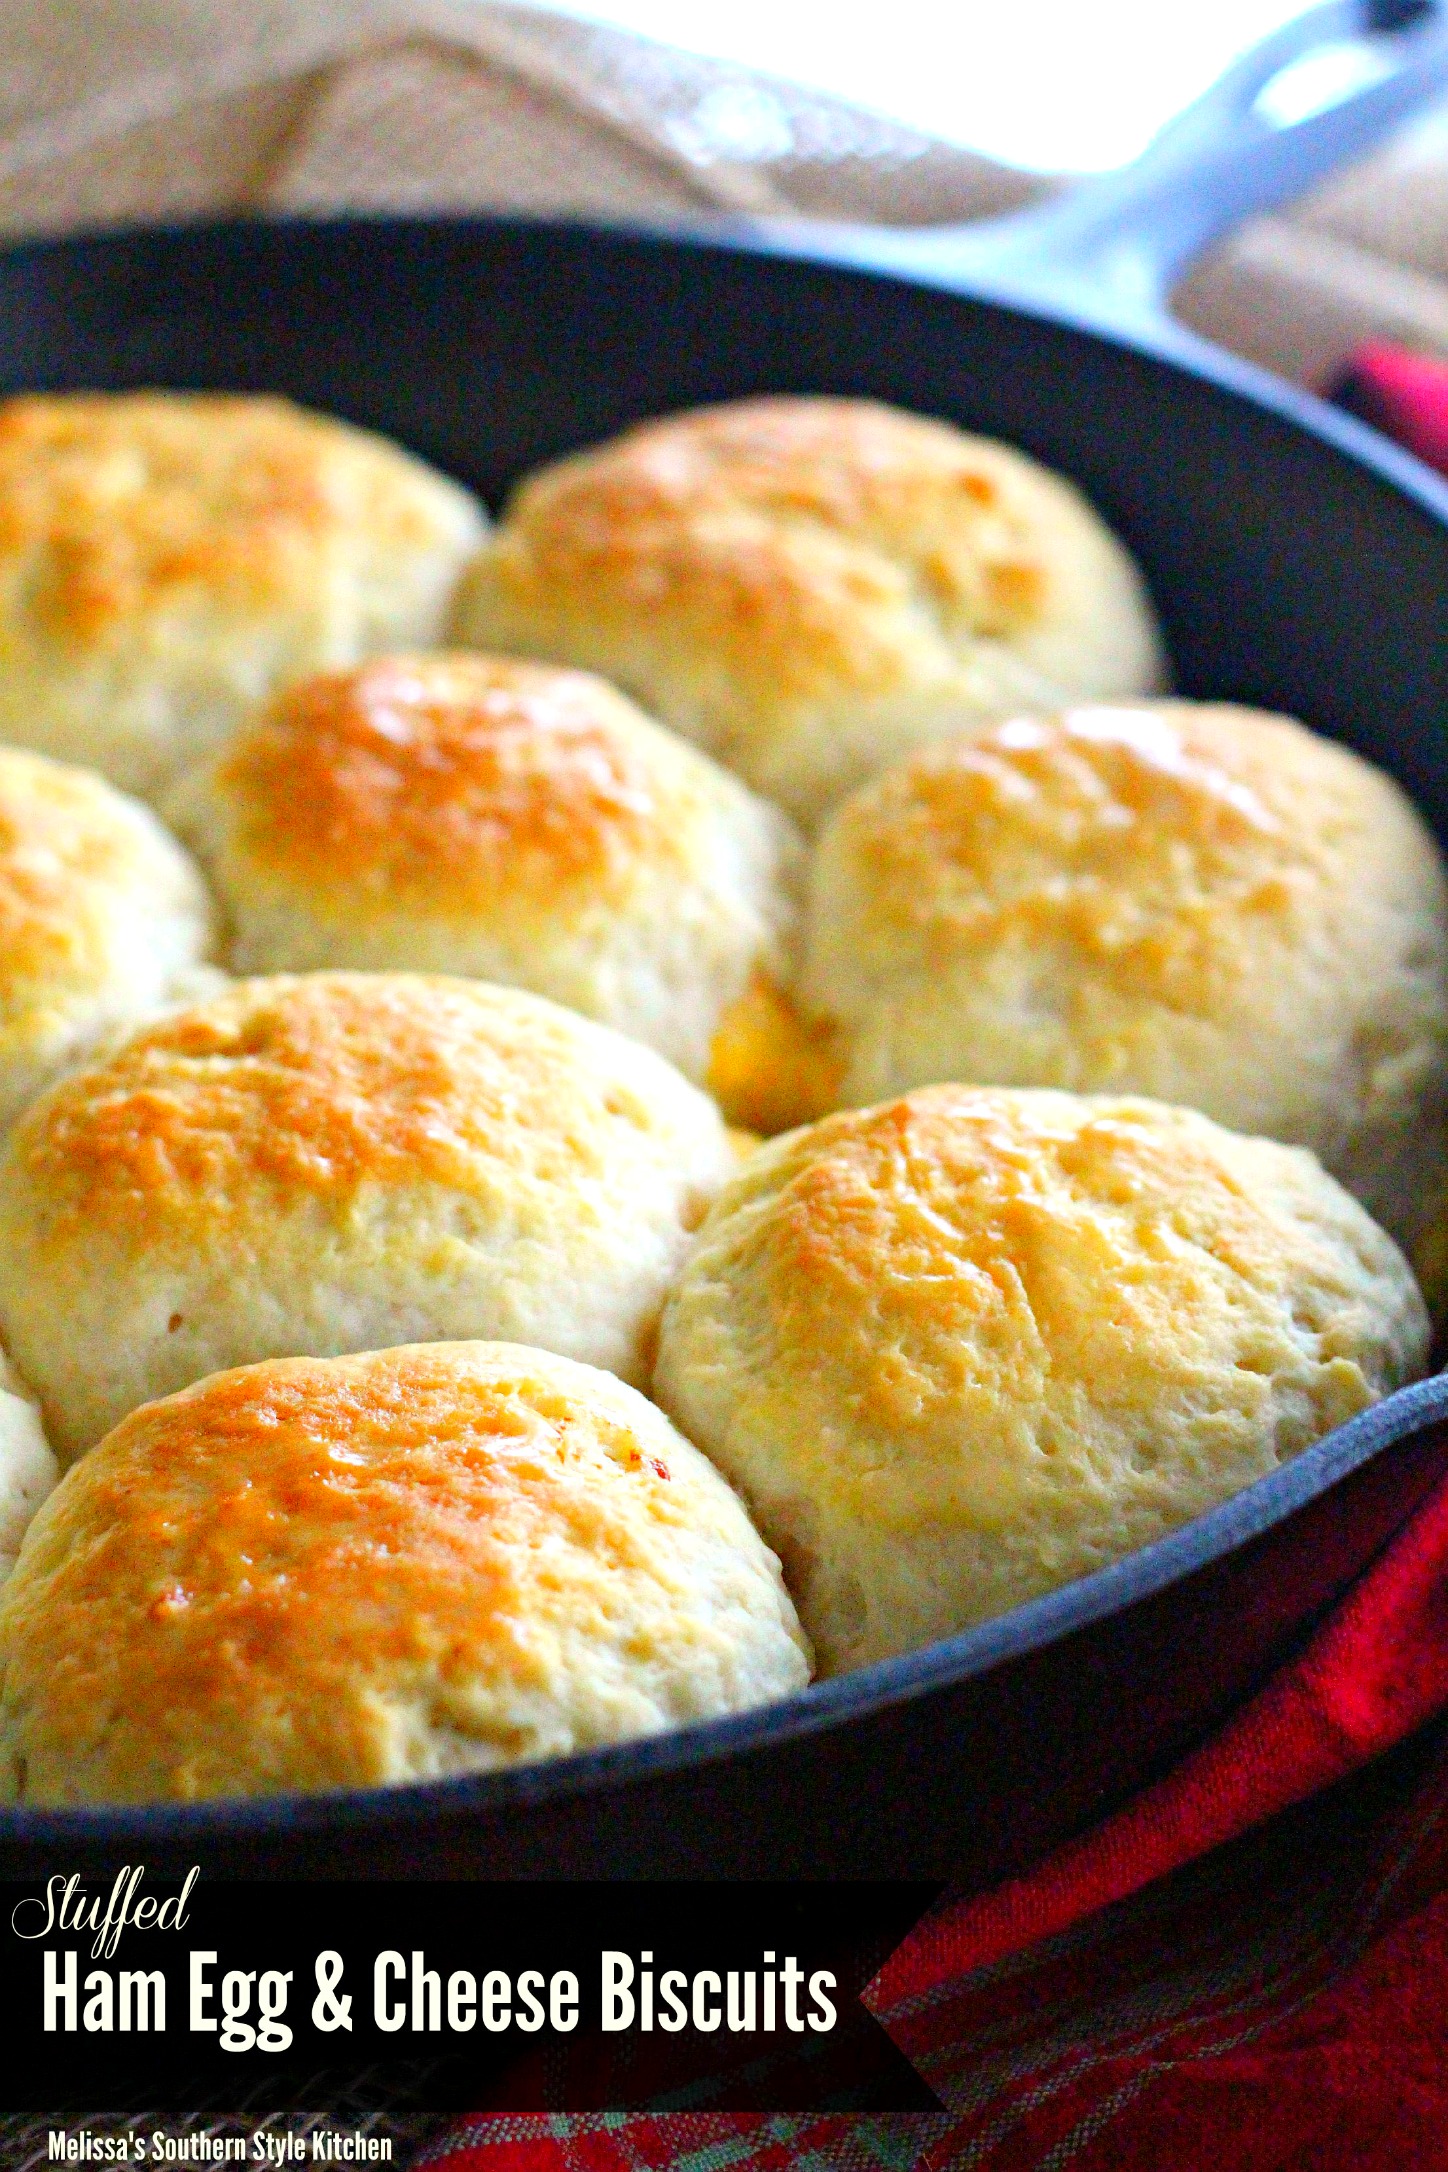 Stuffed Ham Egg And Cheese Biscuits baked in a Skillet